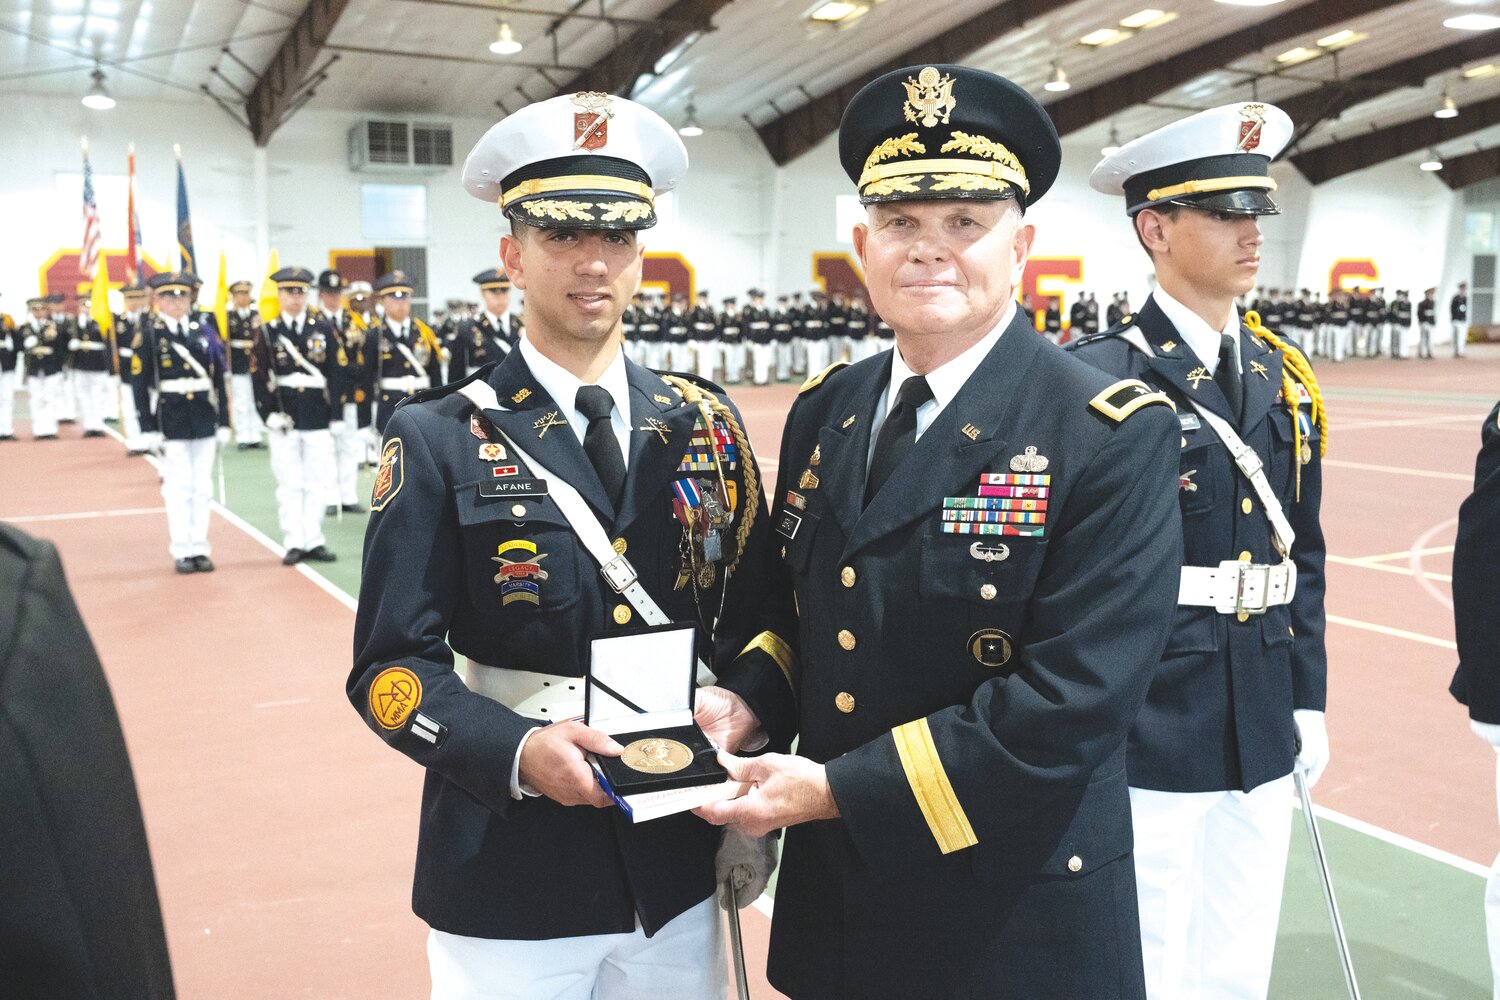 Cadet Marco Afane is joined by MMA President Brigadier General Richard V. Geraci, USA (Ret.)